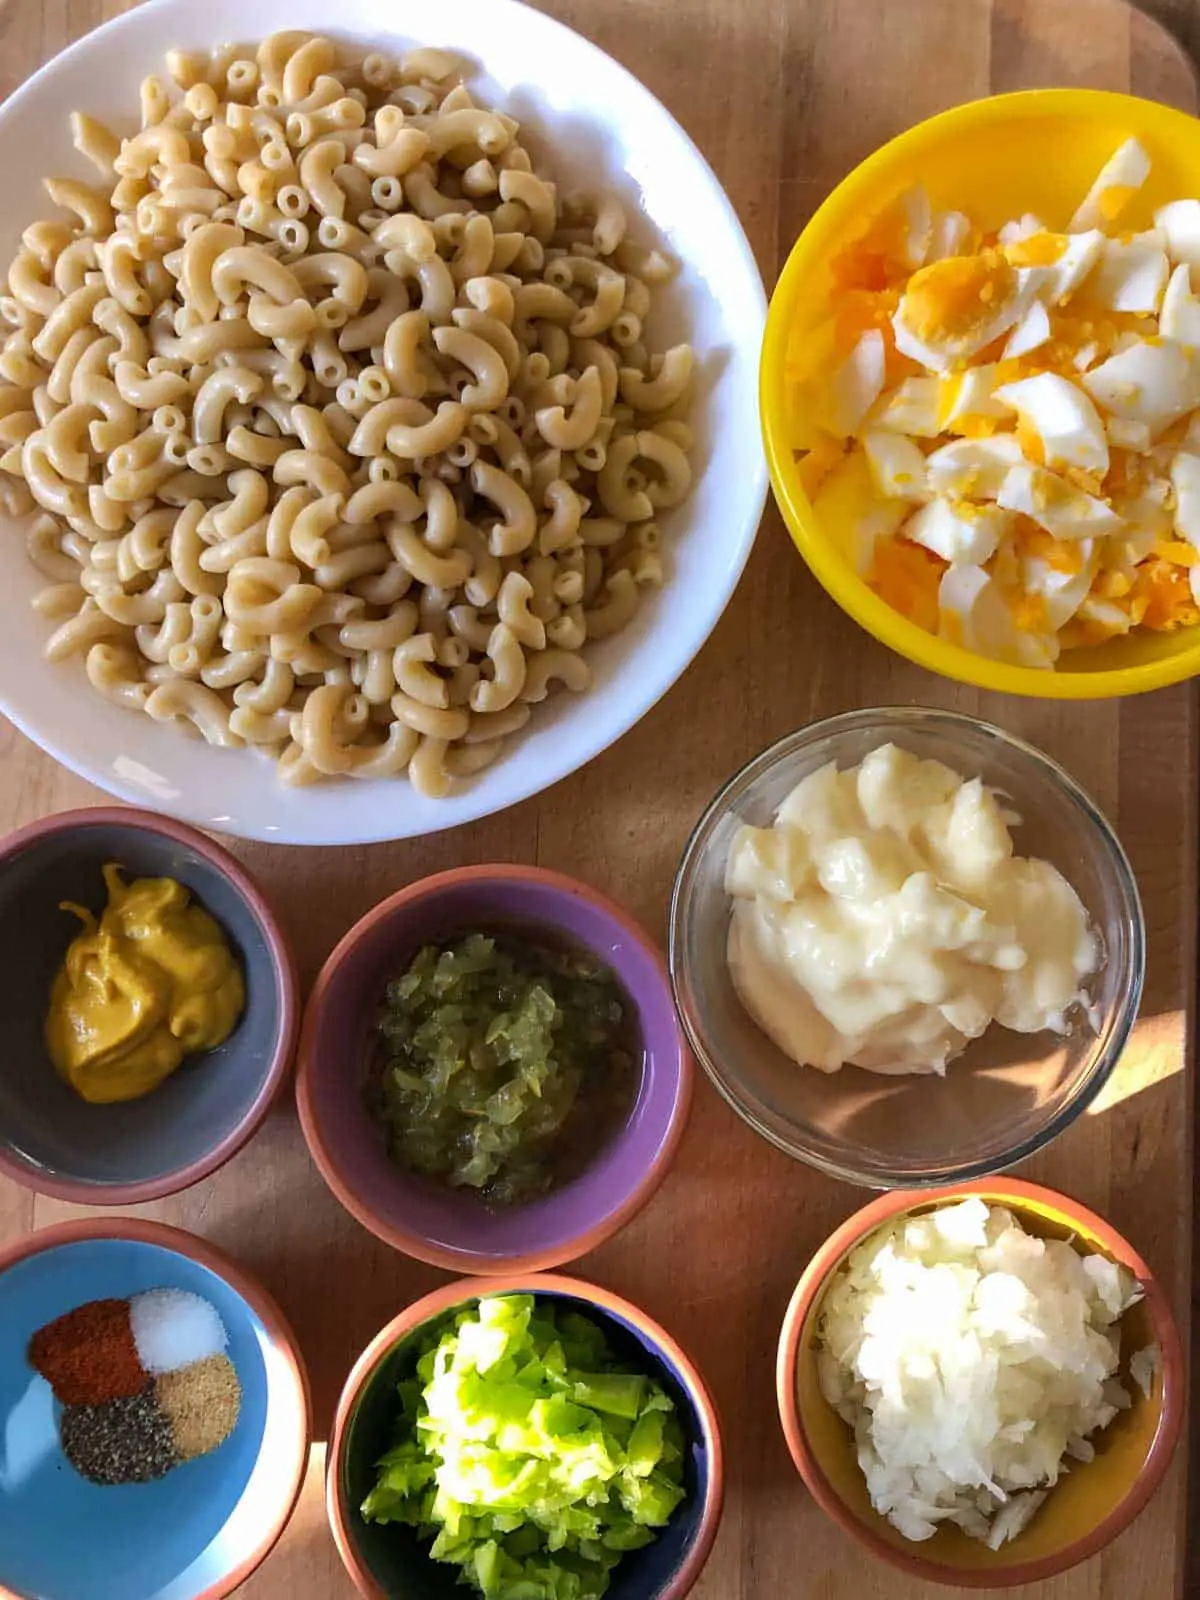 Cooked macaroni in a white dish, chopped hard boiled eggs in a yellow bowl, small bowls containing each of the following: mustard, sweet relish, mayonnaise, seasonings, chopped green bell pepper, and diced onion.